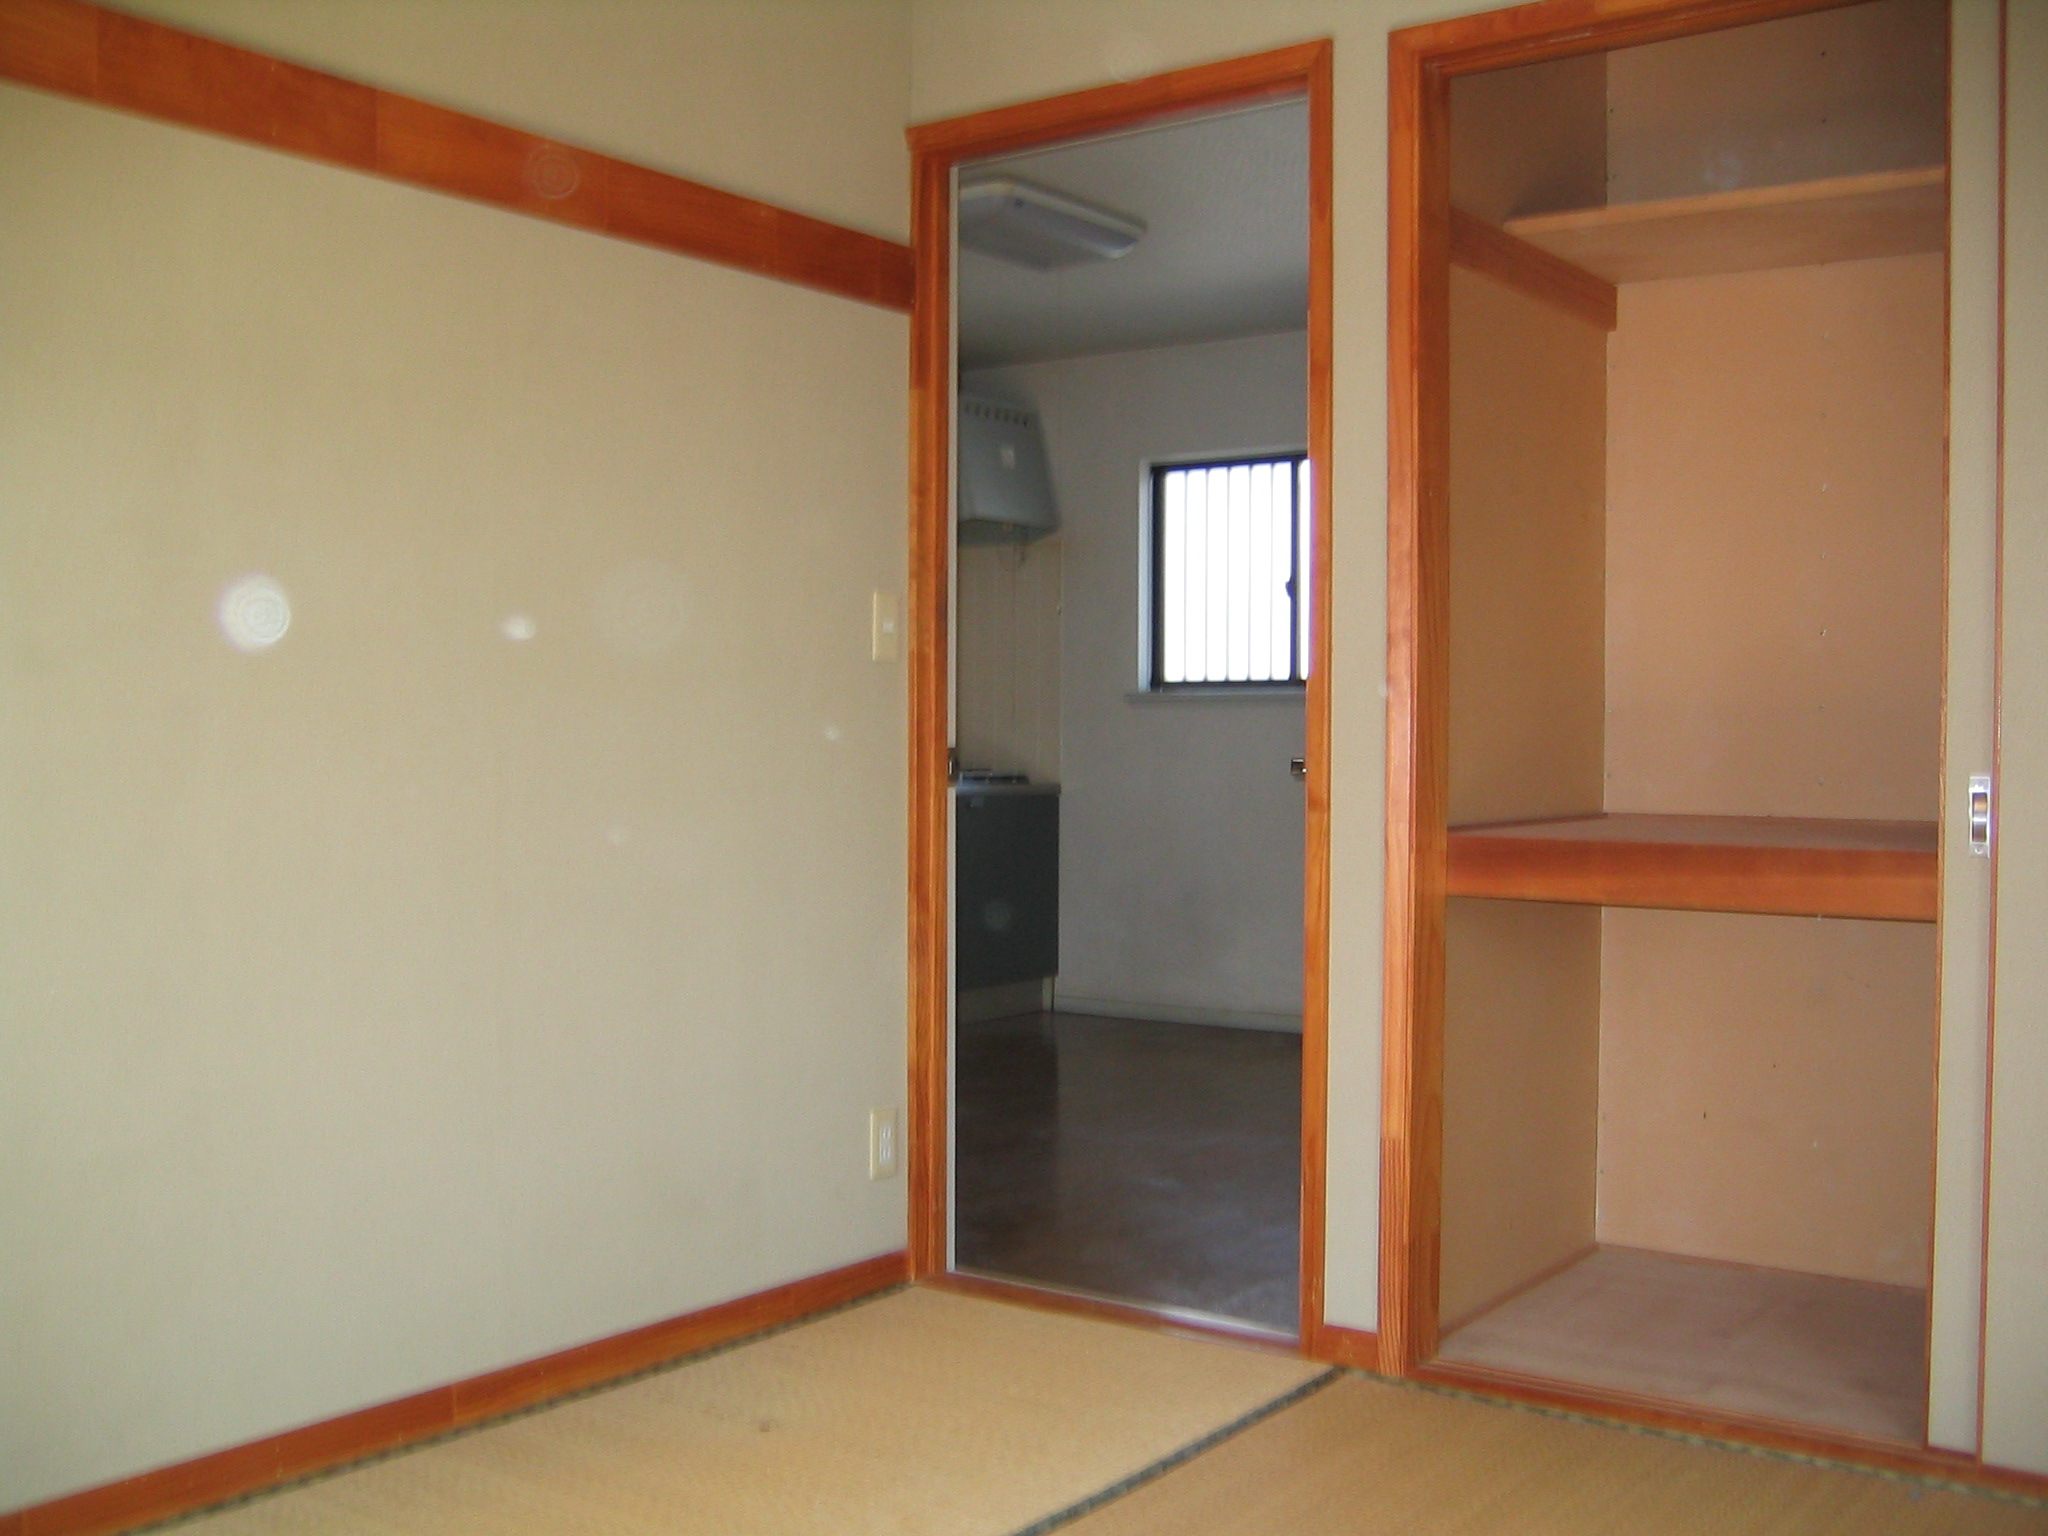 Living and room. Closet Japanese-style room